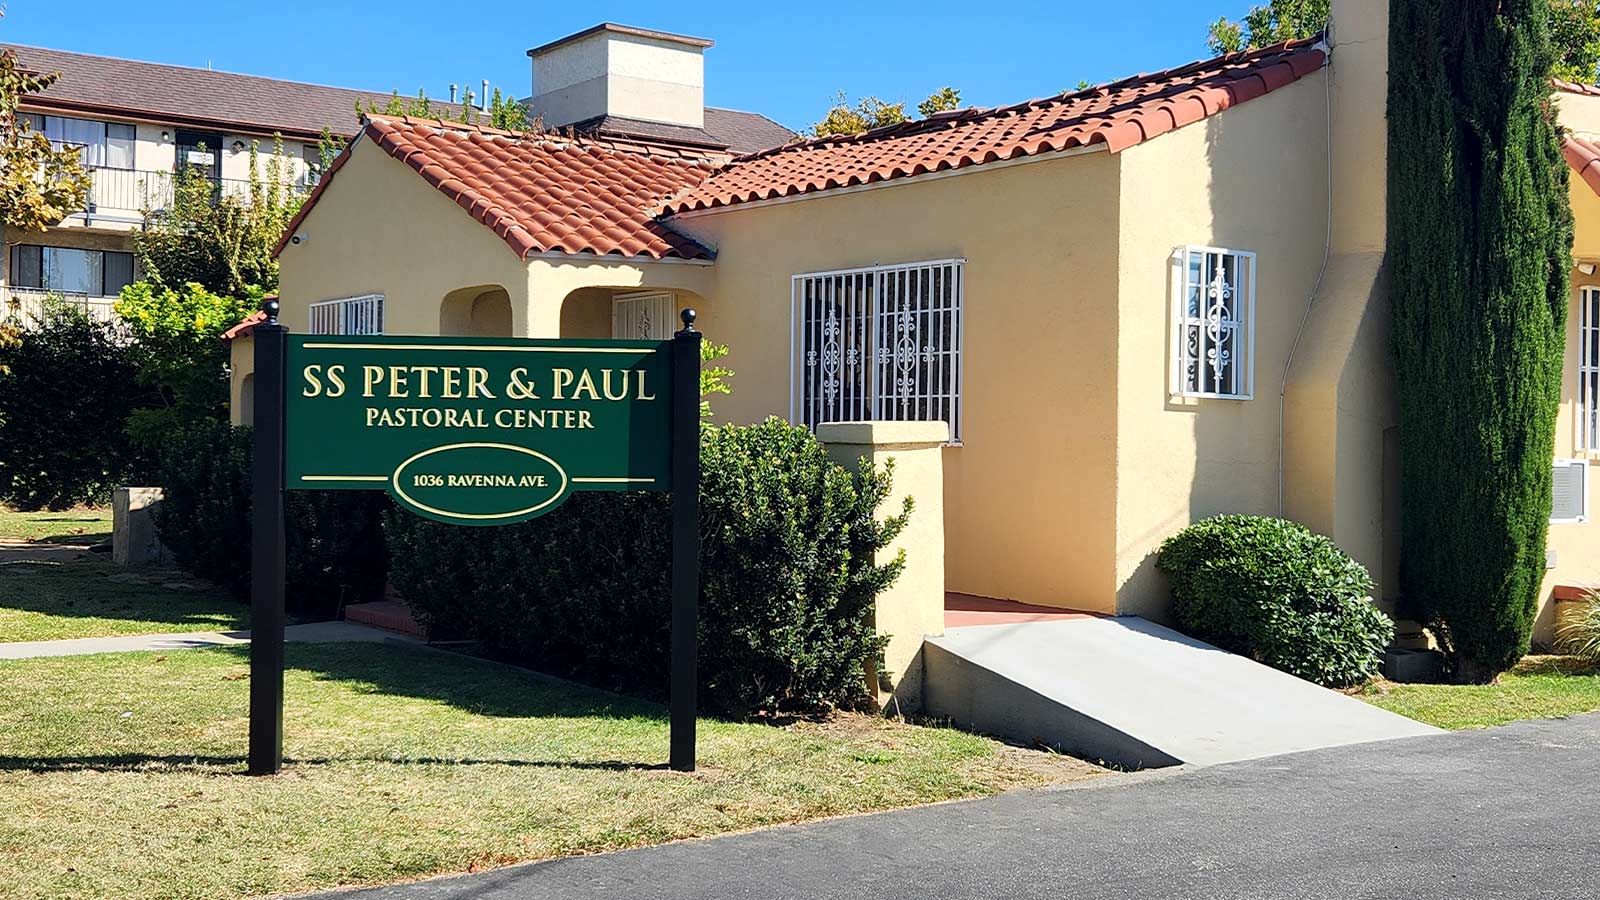 SS Peter & Paul Pastoral Center yard sign at the entrance